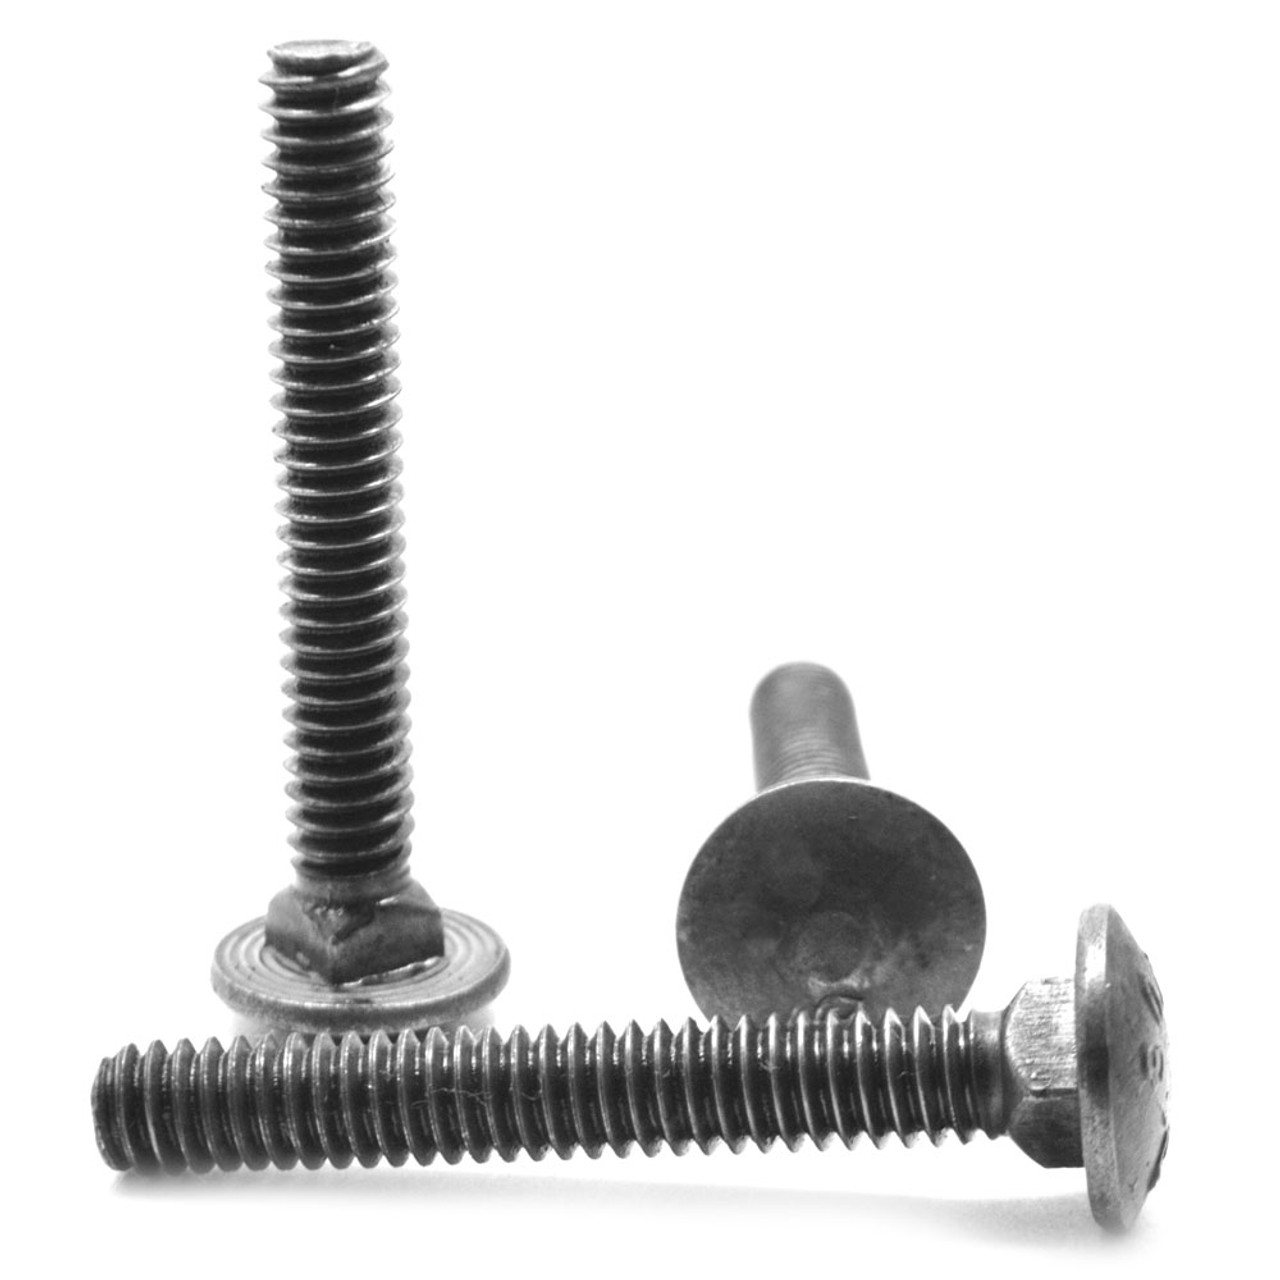 1/4"-20 x 1 1/2" (FT) Coarse Thread A307 Grade A Carriage Bolt Low Carbon Steel Plain Finish